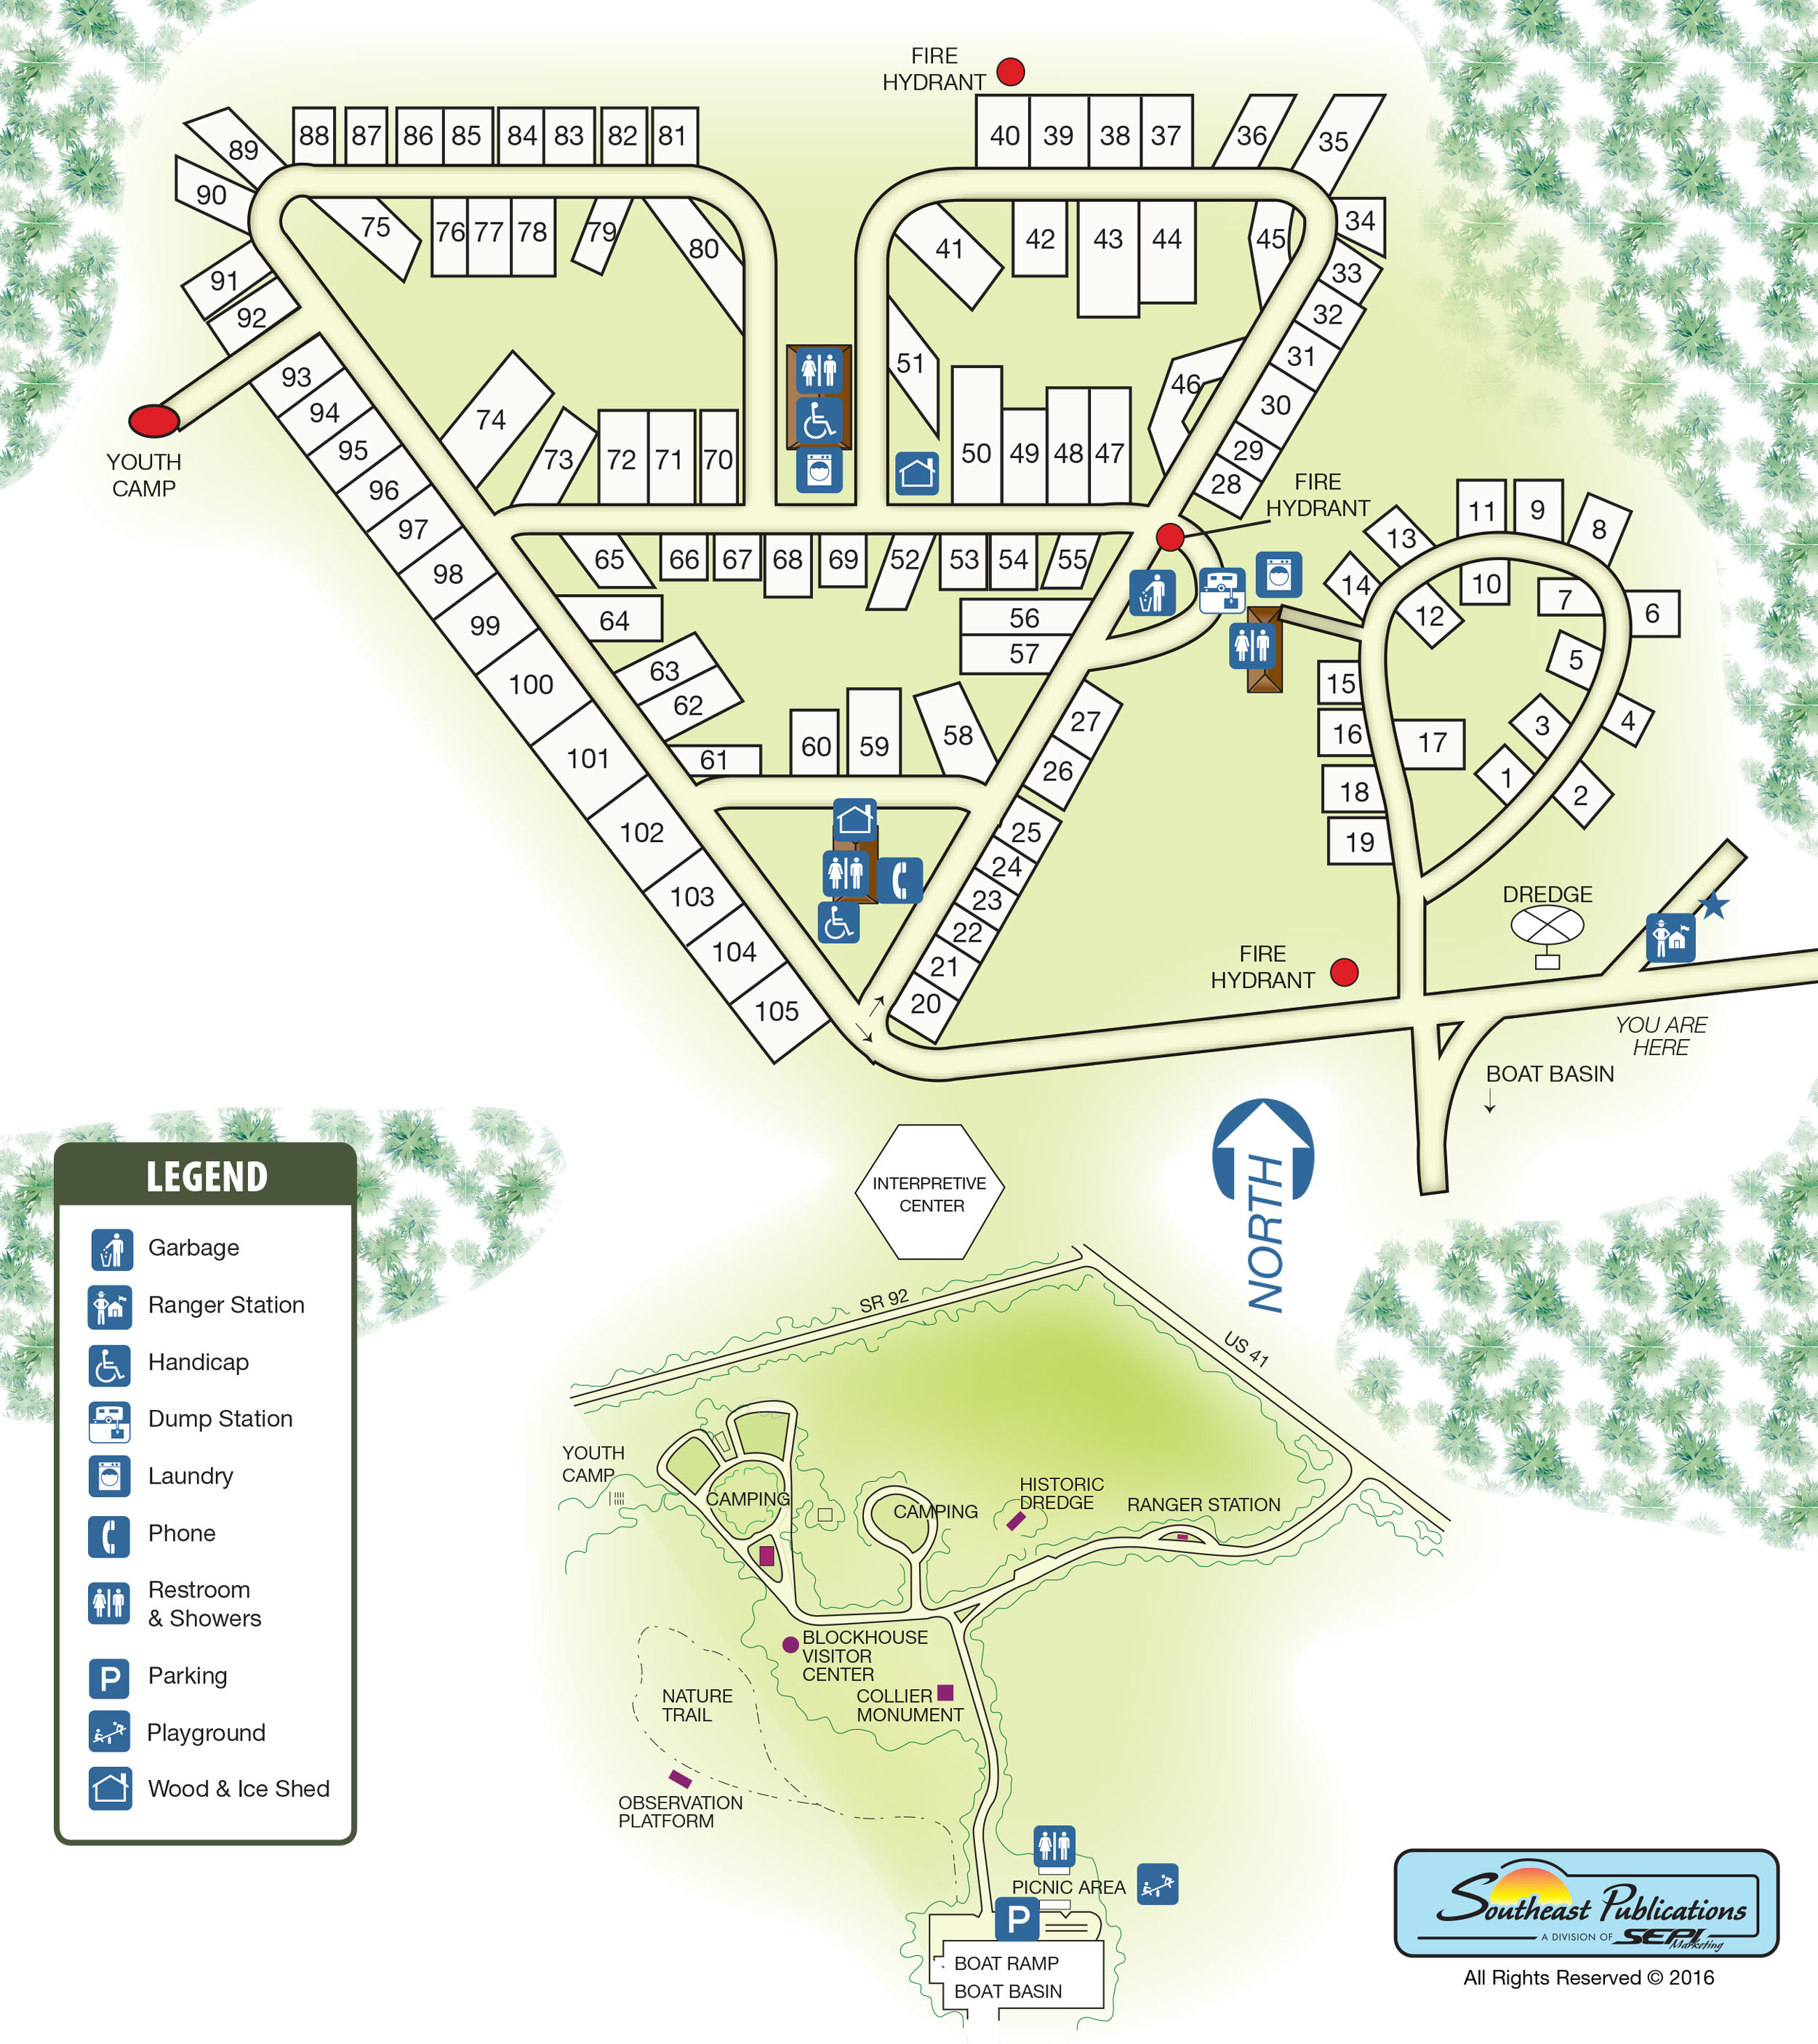 Florida State Parks Rv Camping - Know Your Campground - Florida State Park Campgrounds Map